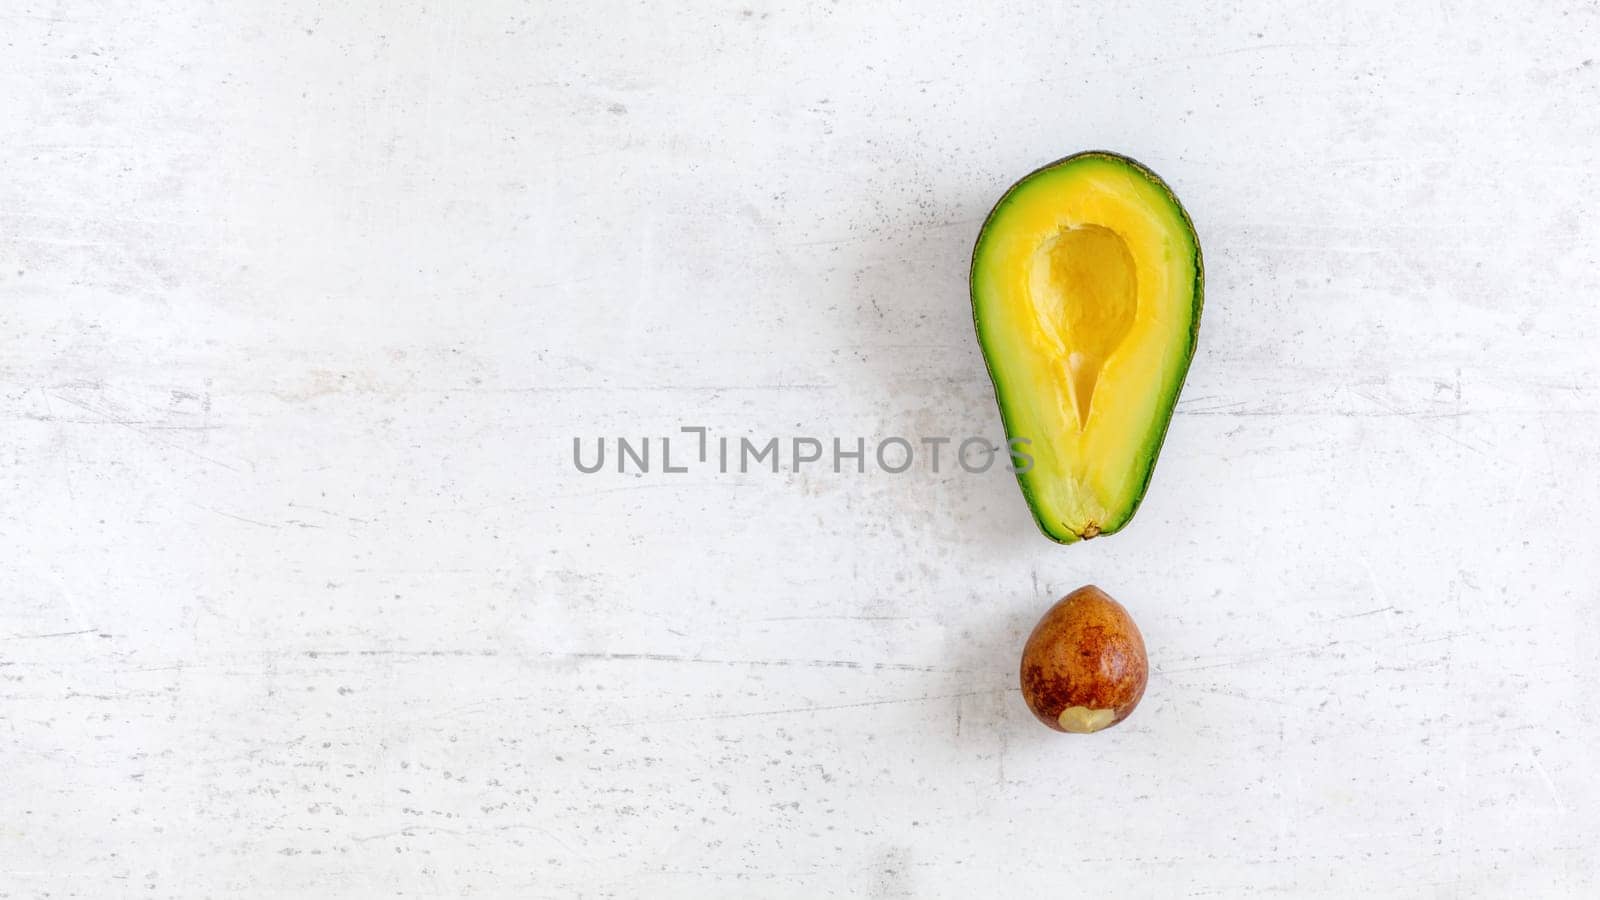 Exclamation mark made of avocado half and seed, on white board, photo from above. Wide banner with space for text on left side. by Ivanko